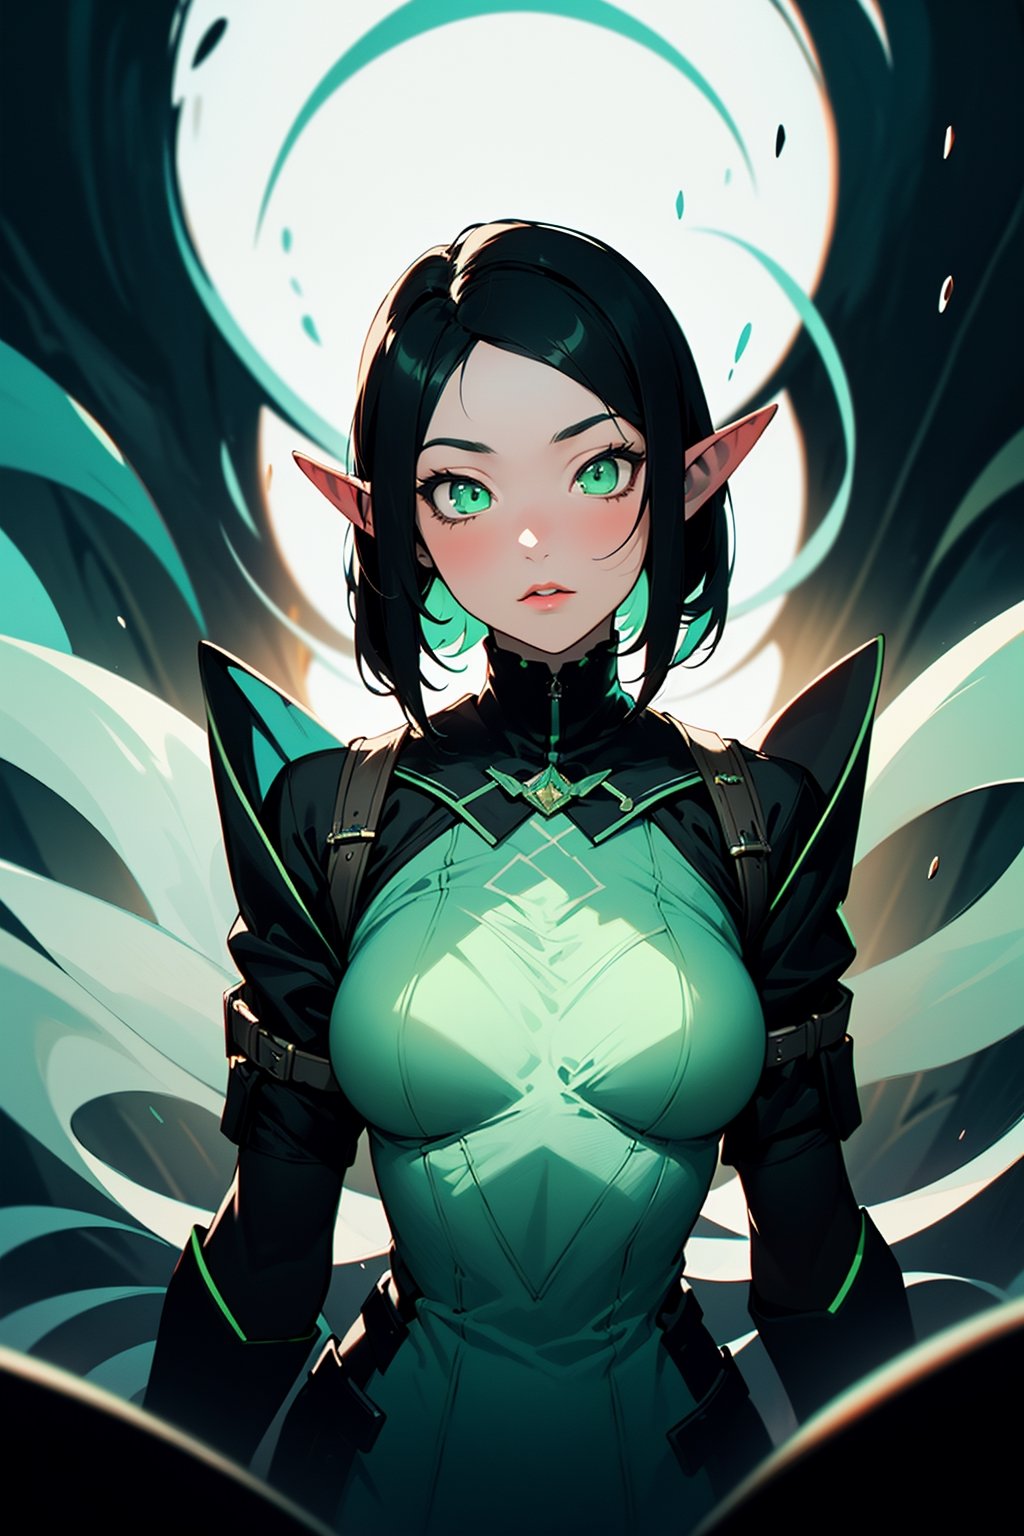 1woman(black hair, green eyes), elf, elf_ears, absurdres, highres, ultra detailed, (1girl:1.3),BREAK, infrared photography, otherworldly hues, surreal landscapes, unseen light, ethereal glow, vibrant colors, ghostly effect,

,valorantviper